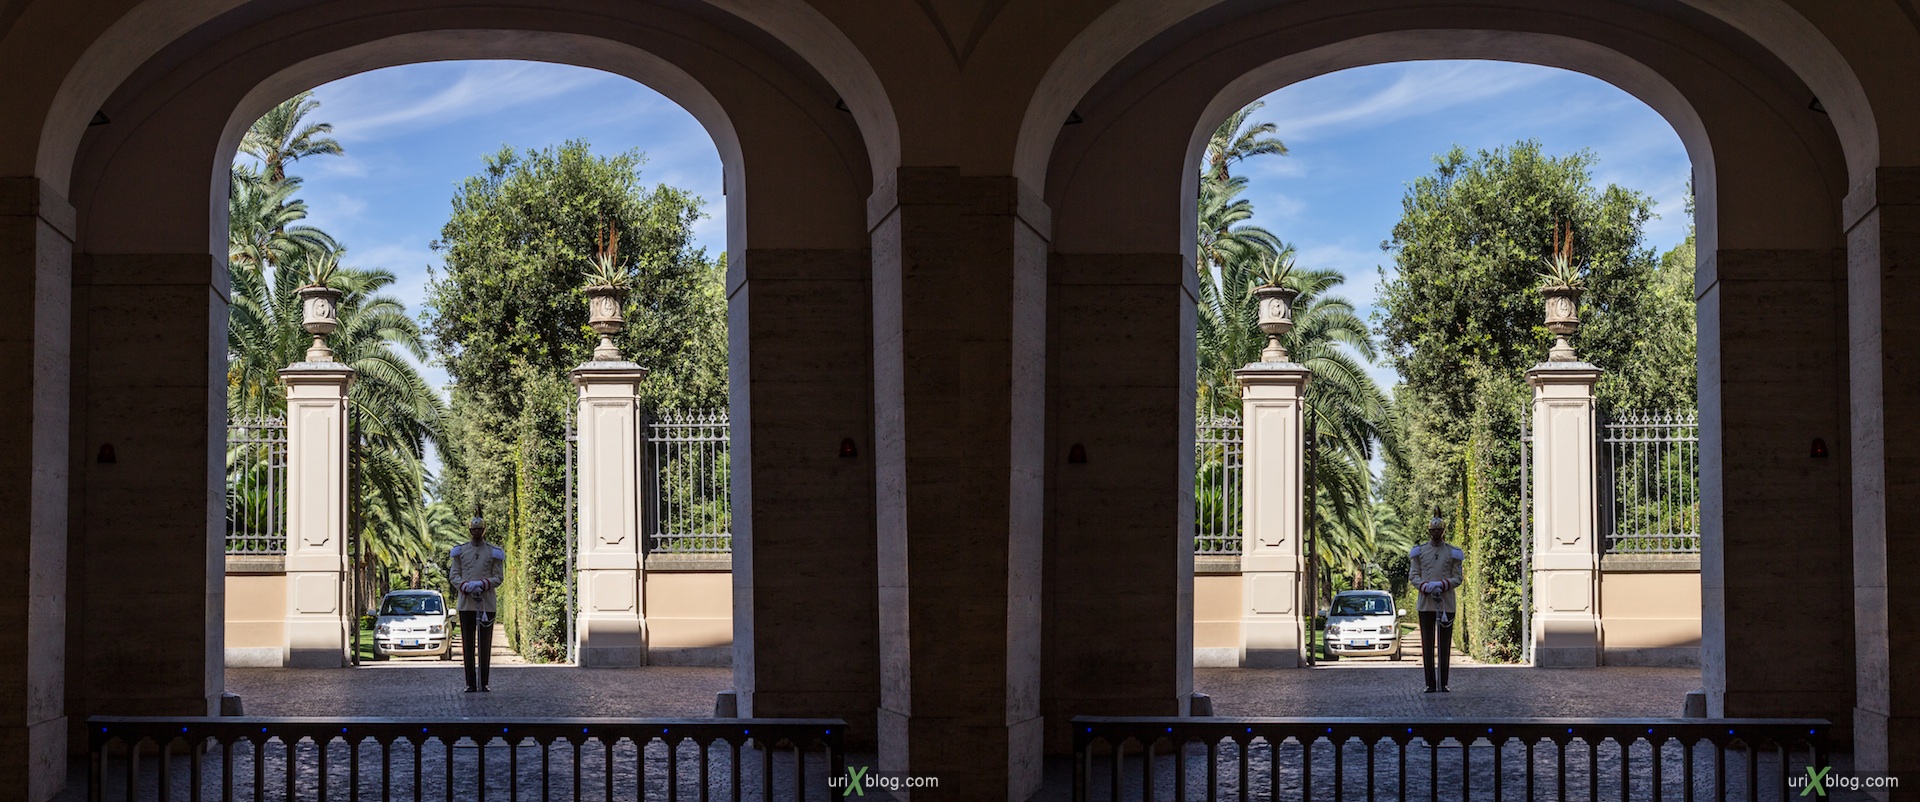 2012, Quirinal Palace, Residence of the President, soldier, Rome, Italy, Europe, 3D, stereo pair, cross-eyed, crossview, cross view stereo pair